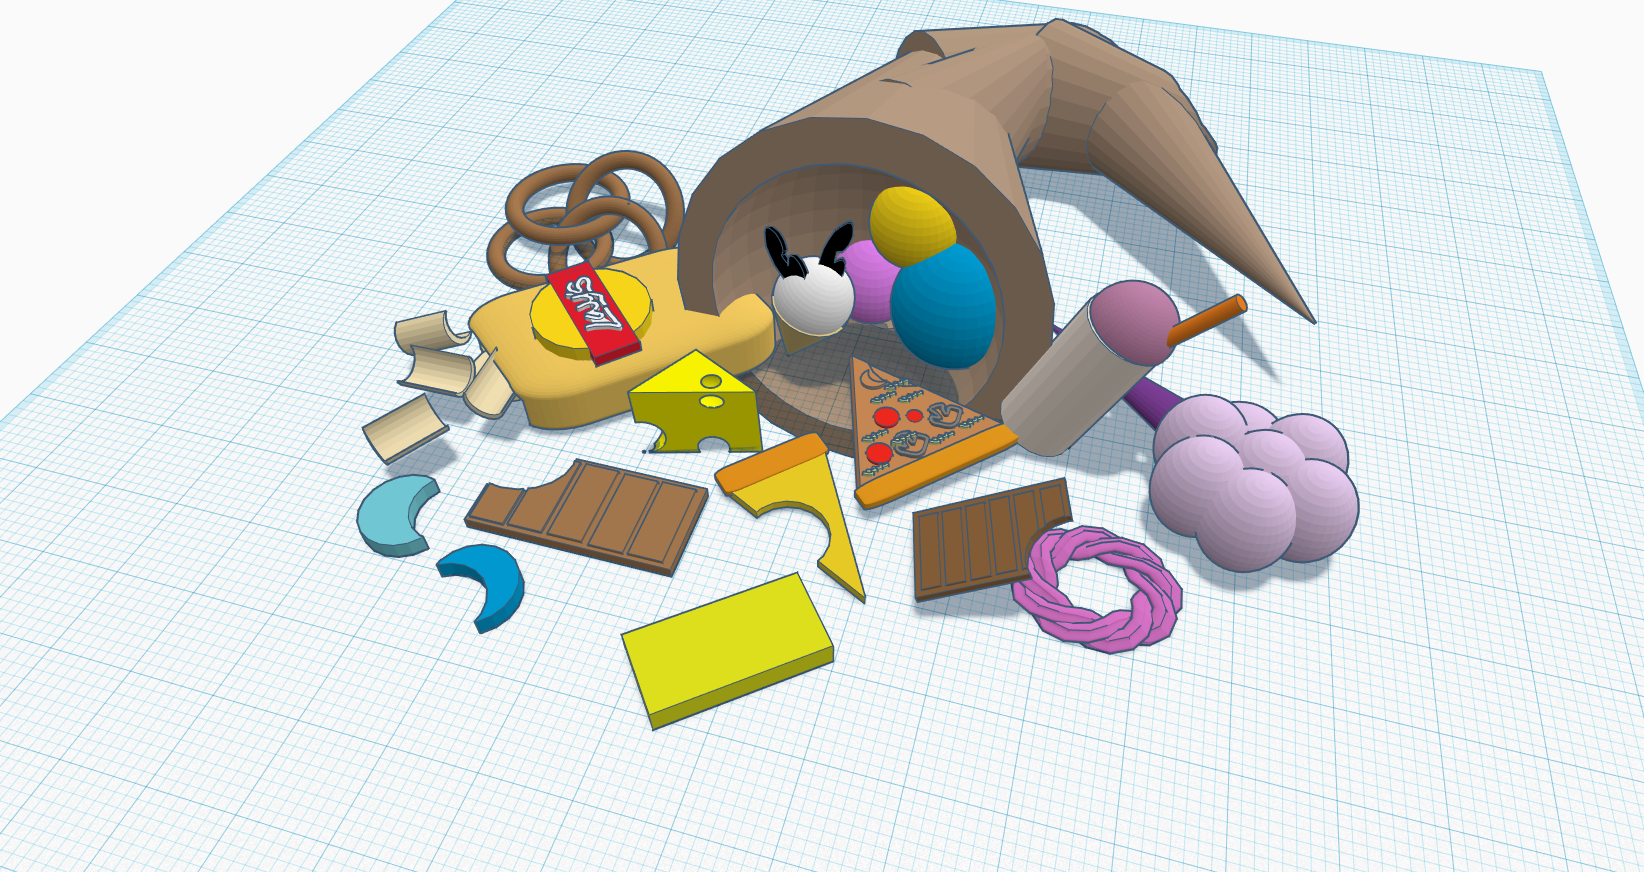 3D Design Classes for Middle School Students